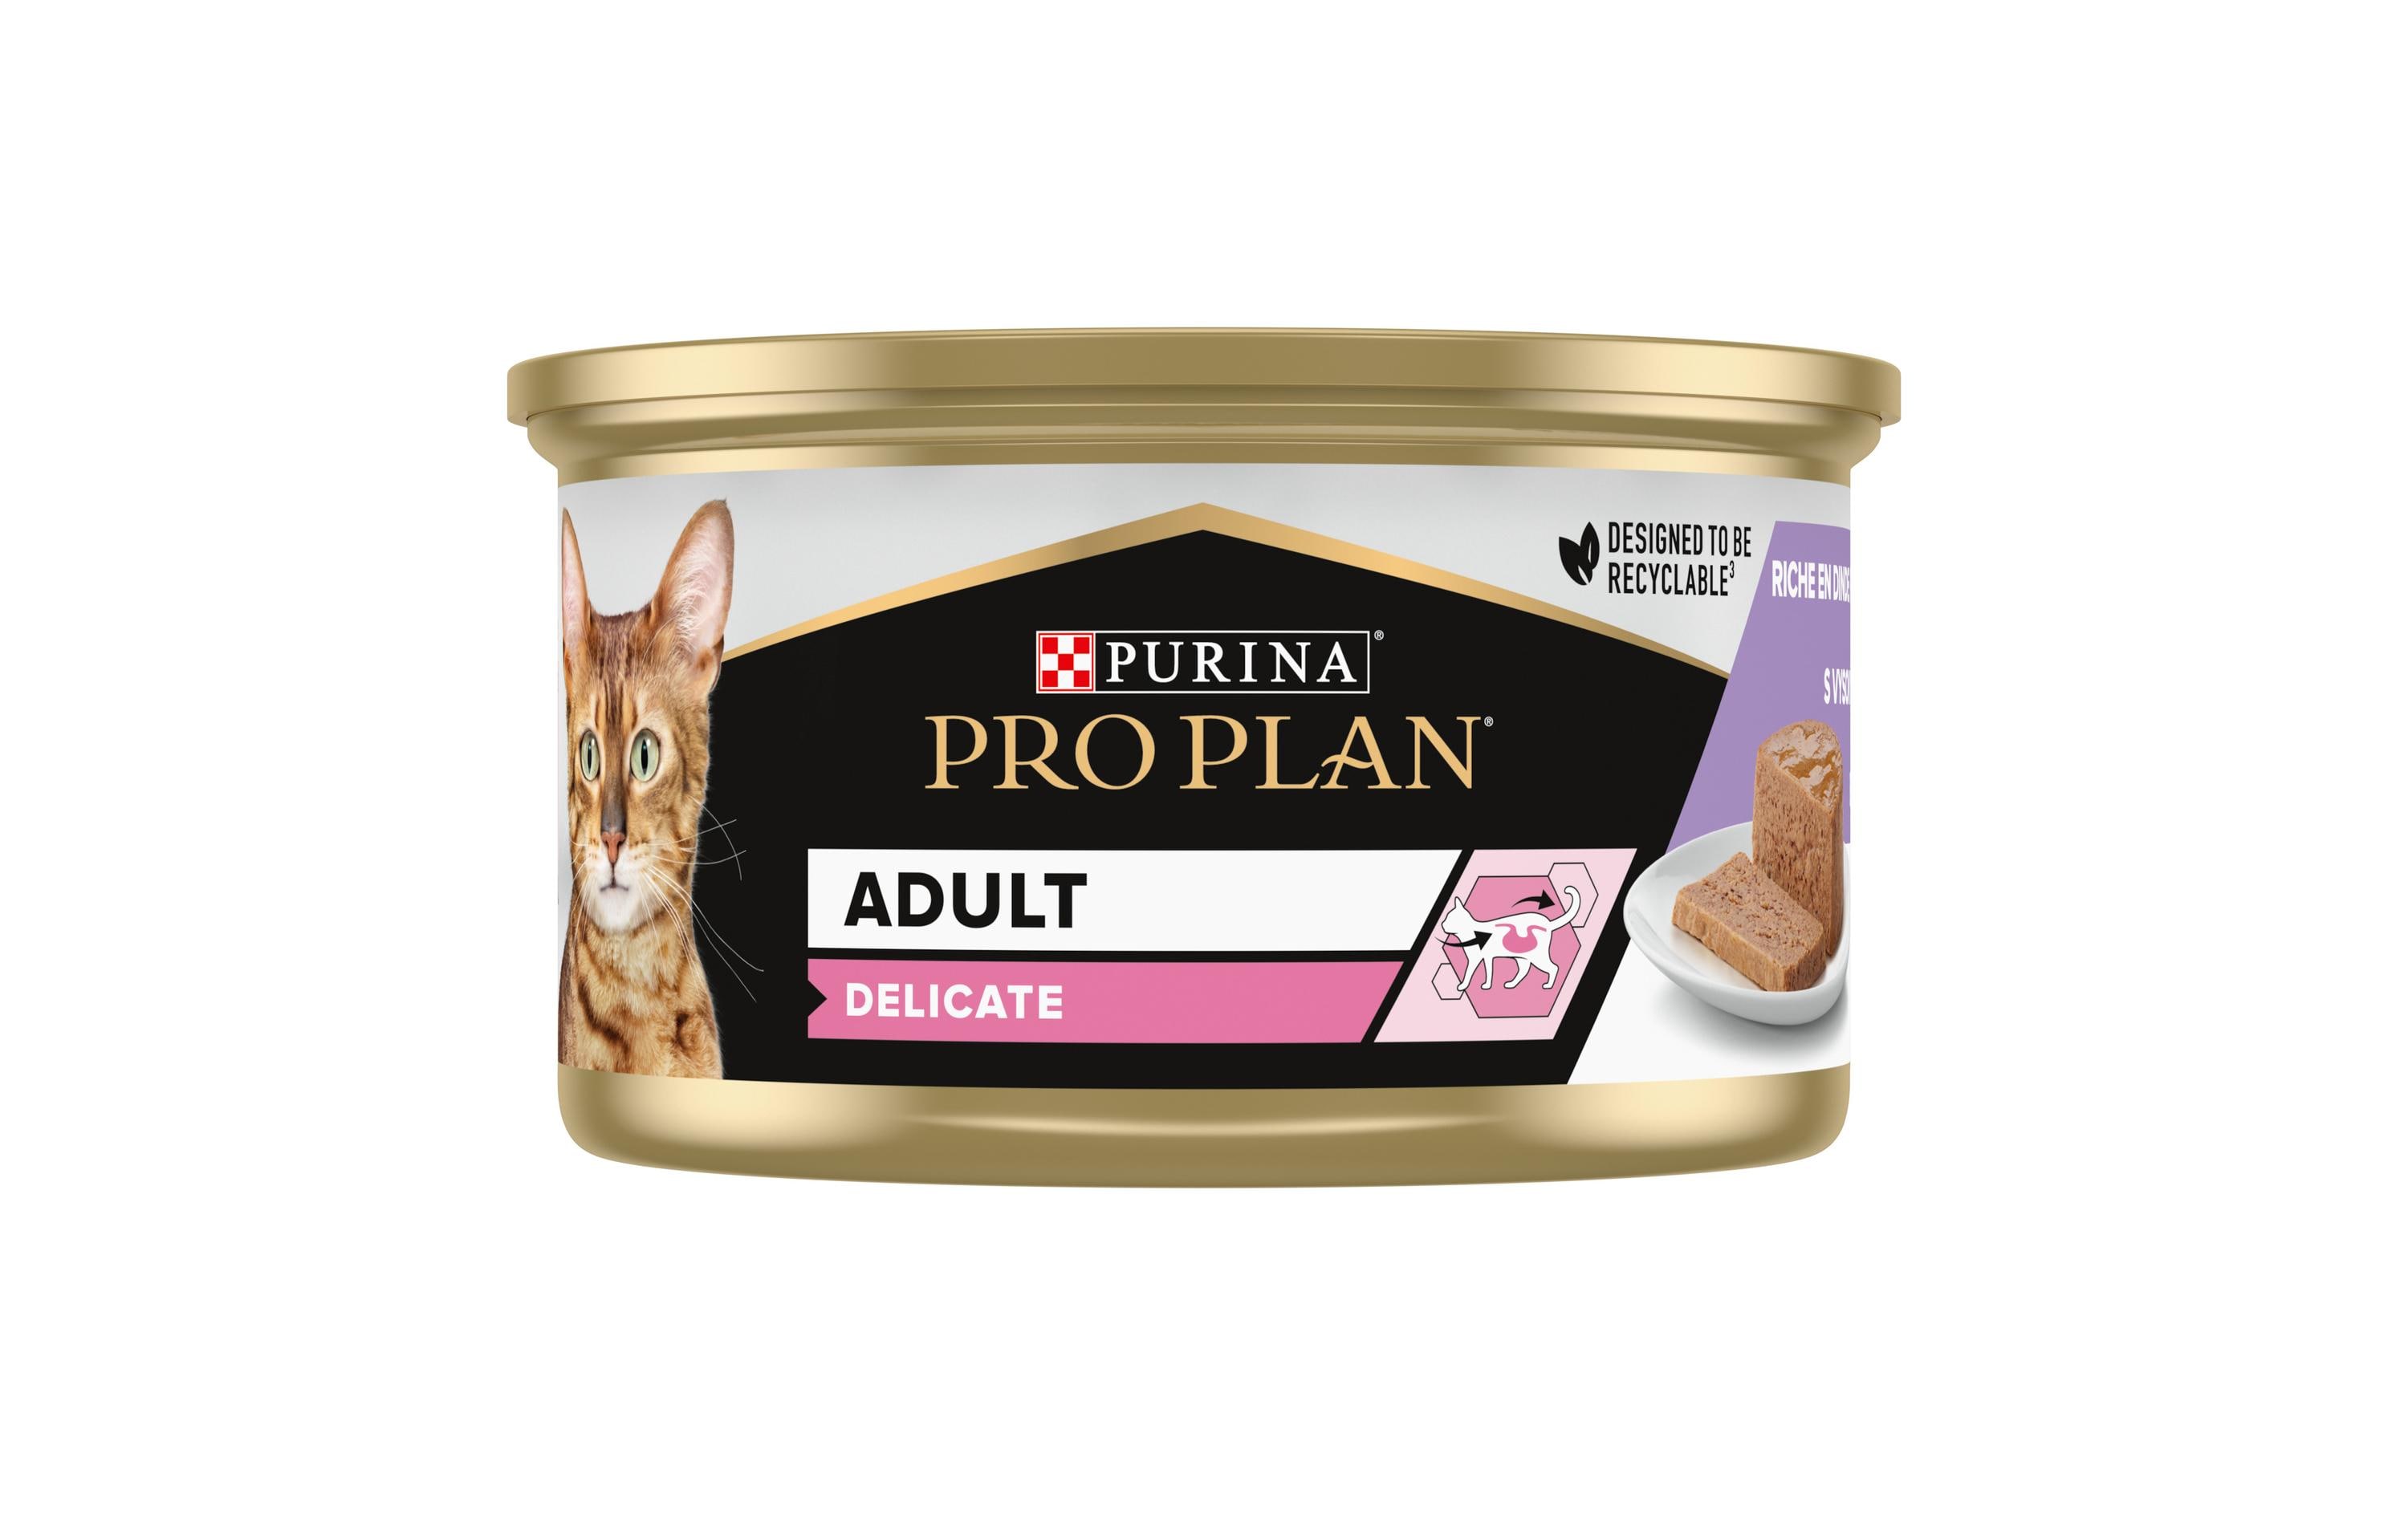 Purina Pro Plan Nassfutter Adult Delicate Truthahn, 85 g